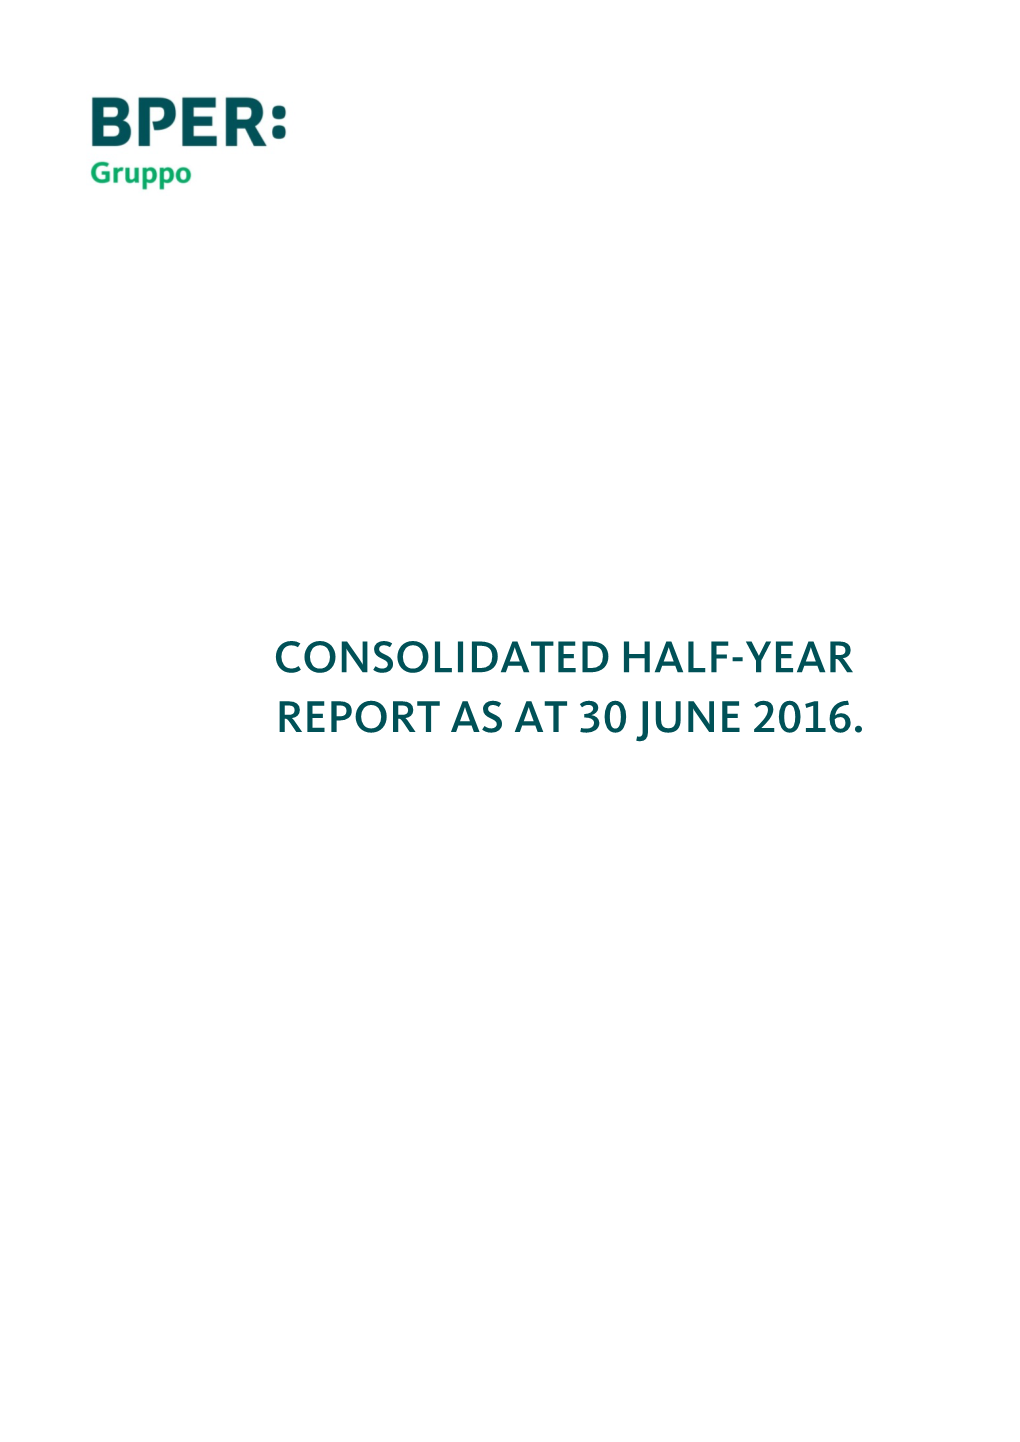 CONSOLIDATED HALF-YEAR REPORT AS at 30 JUNE 2016. Consolidated Half-Year Report As at 30 June 2016